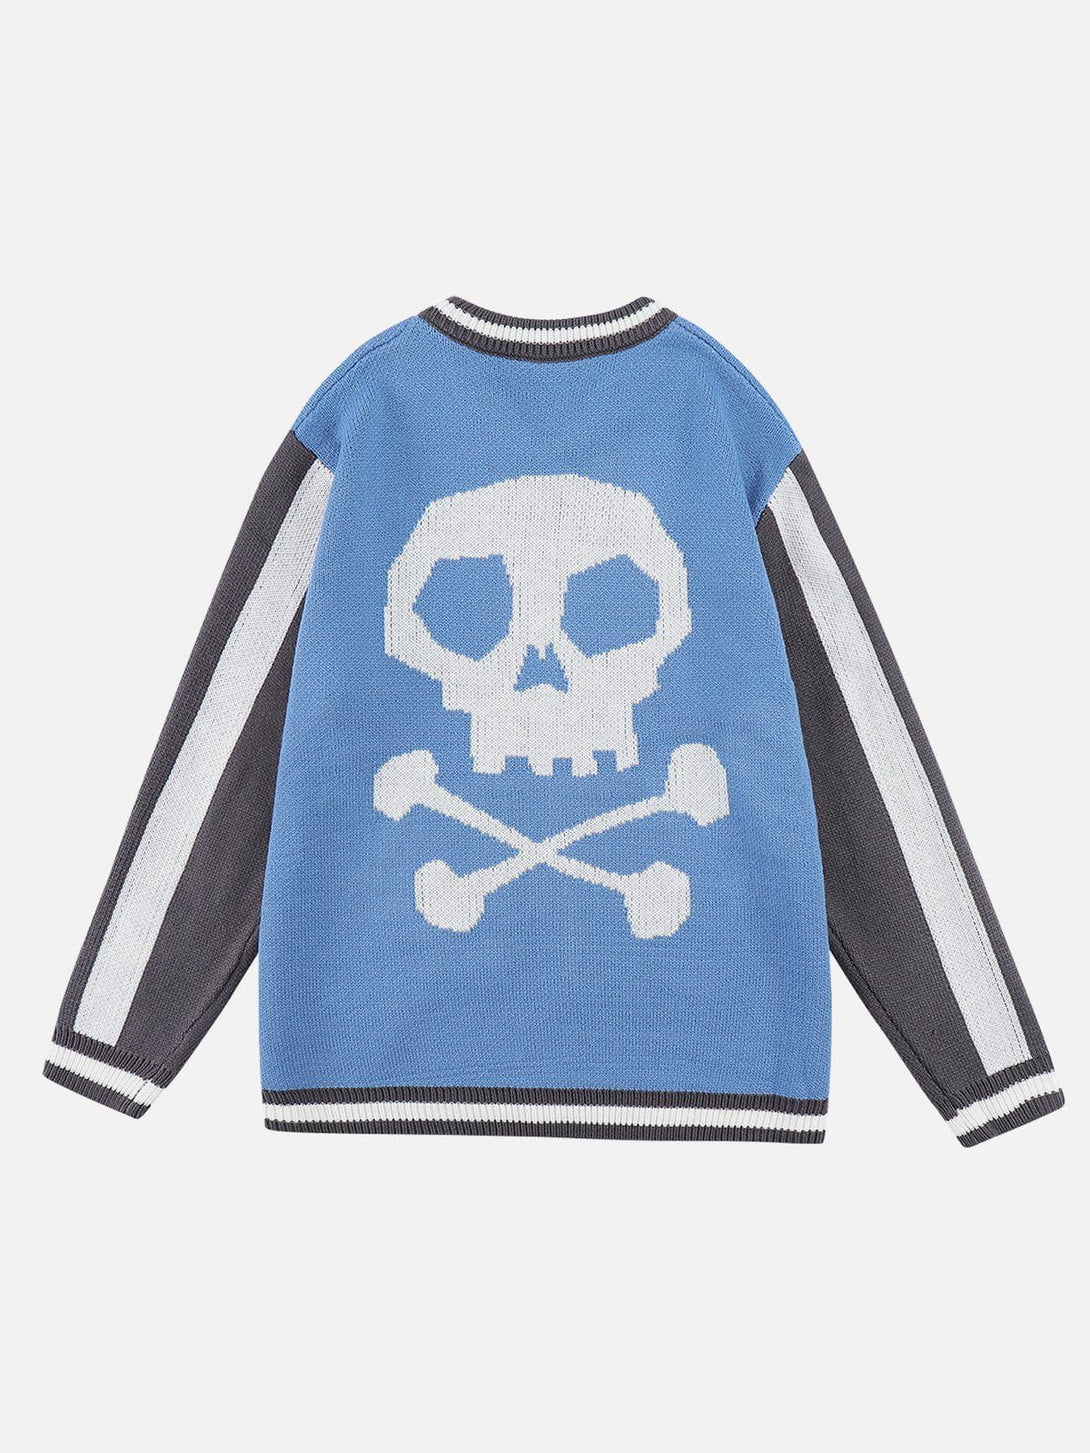 Majesda® - Skeleton Stitching Color Sweater outfit ideas streetwear fashion